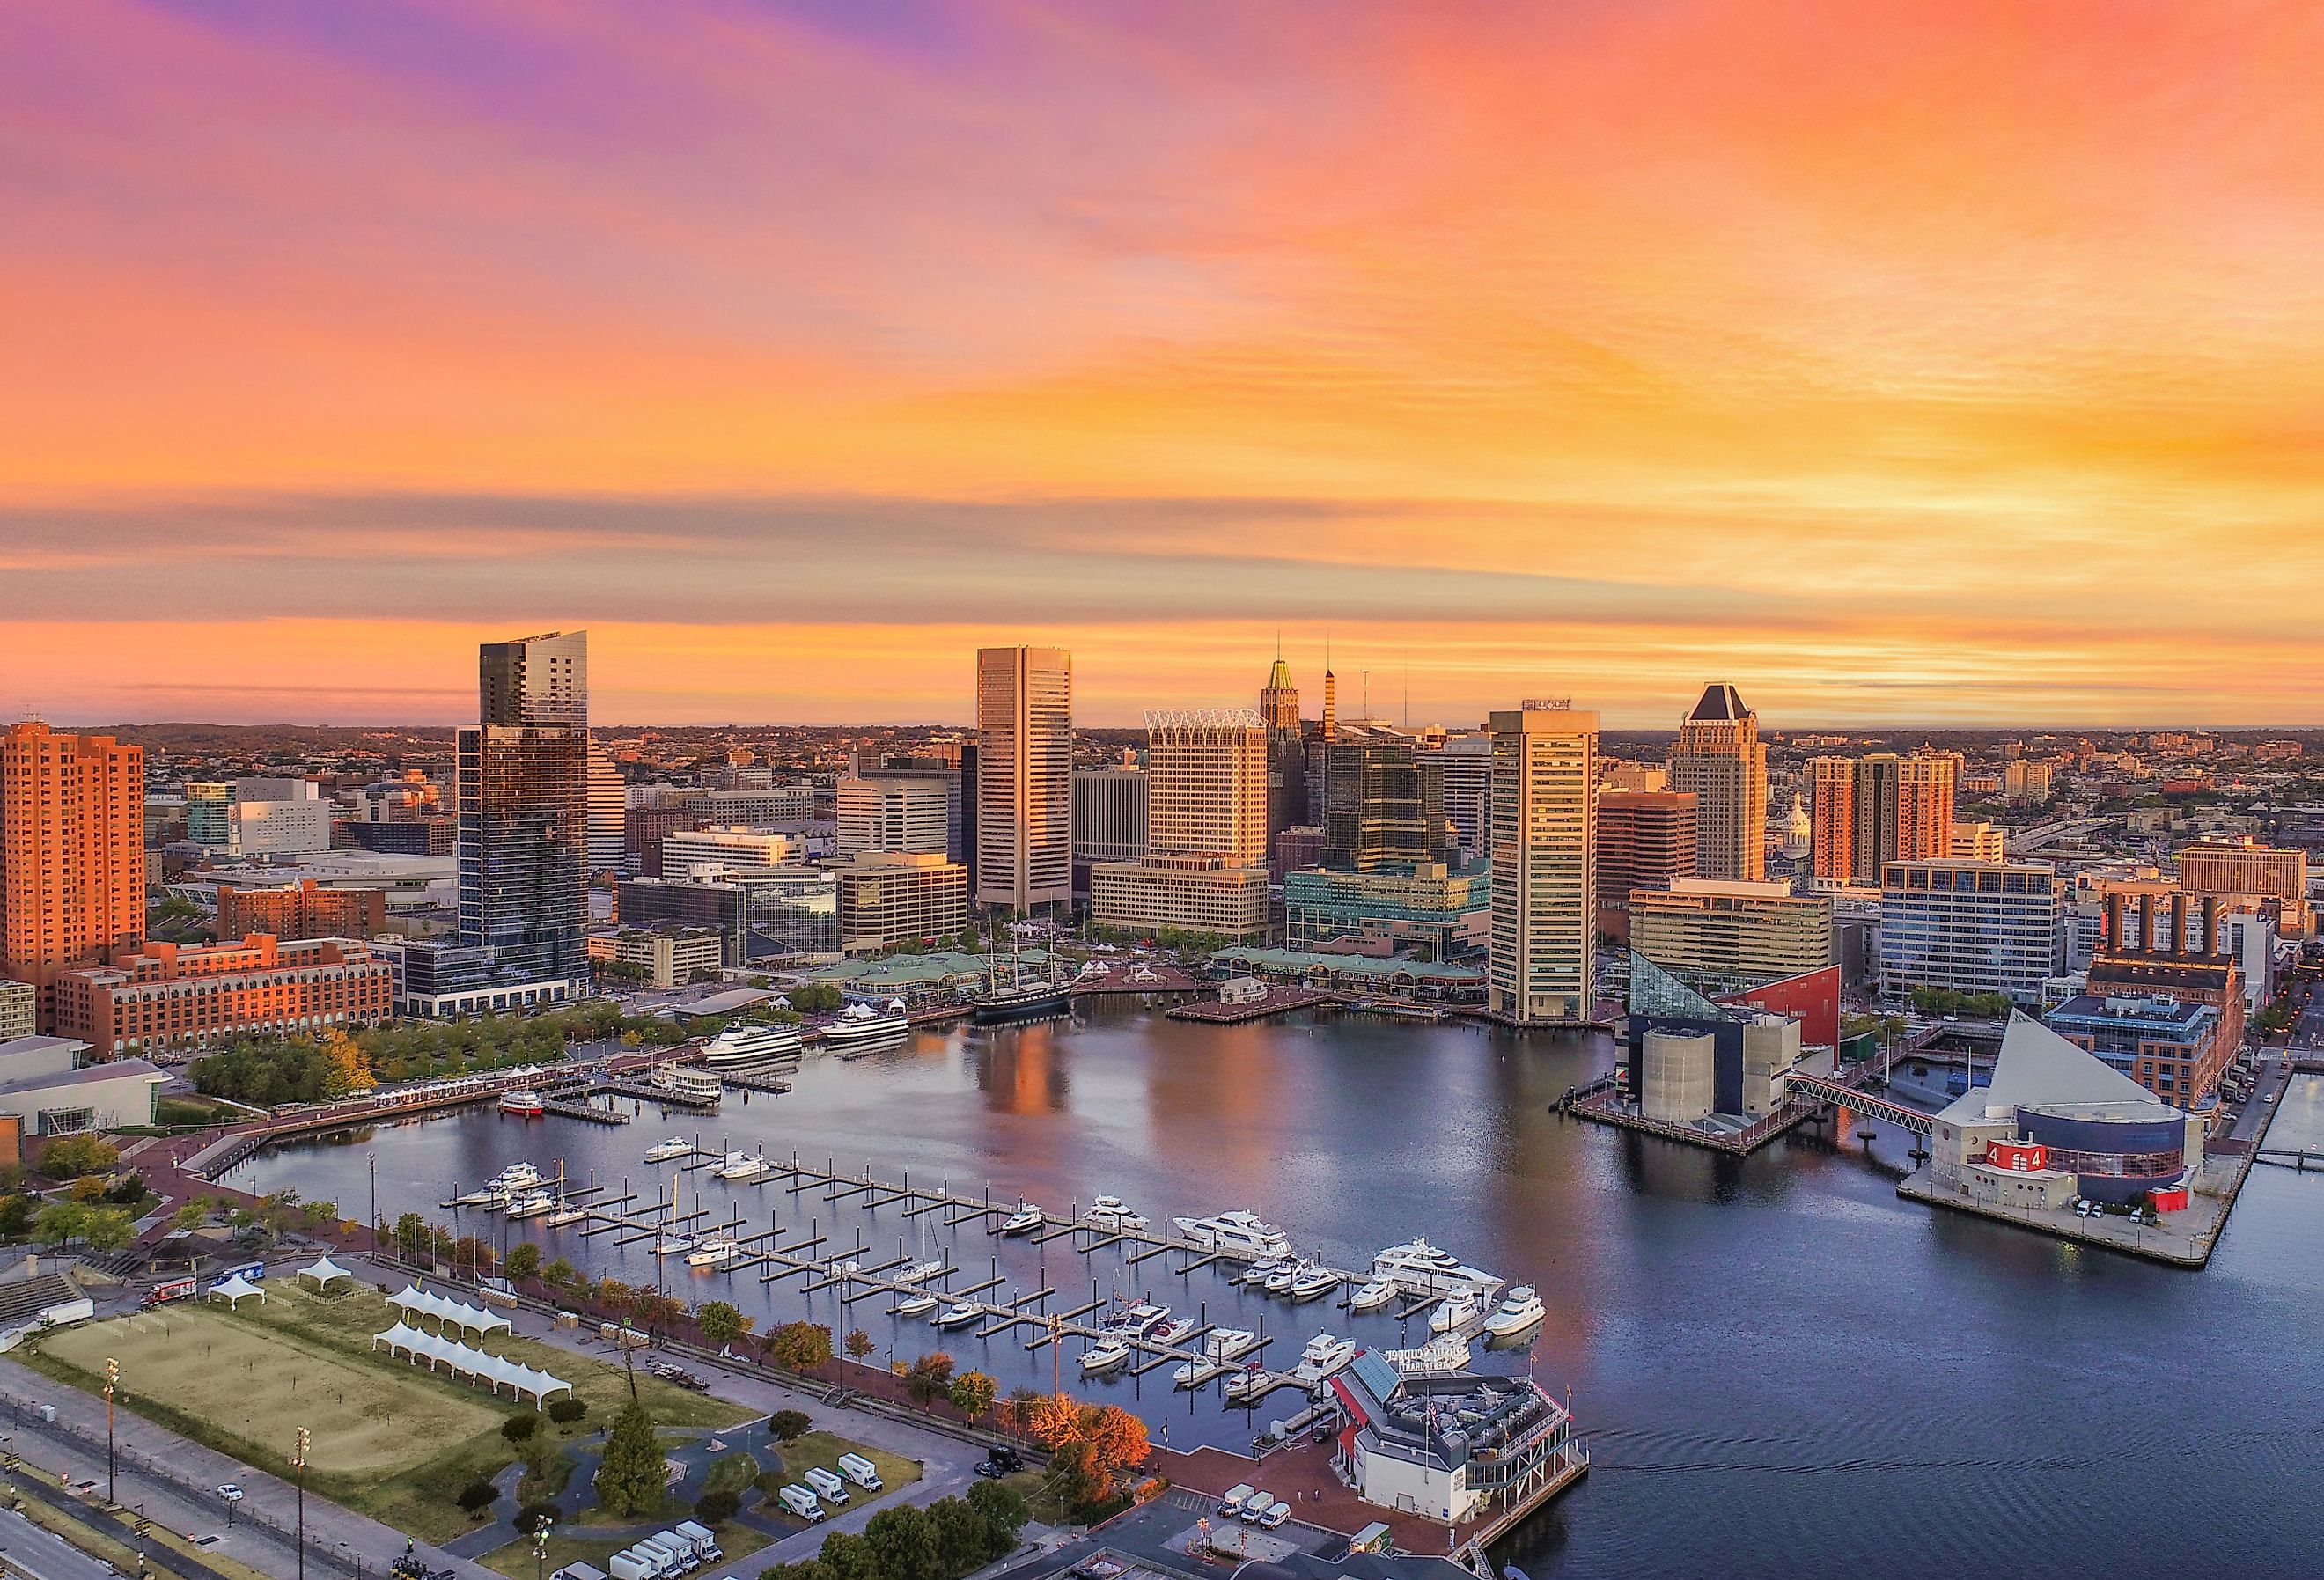 Aerial view of Baltimore skyline at sunrise. Image credit Kevin Ruck via Shutterstock.